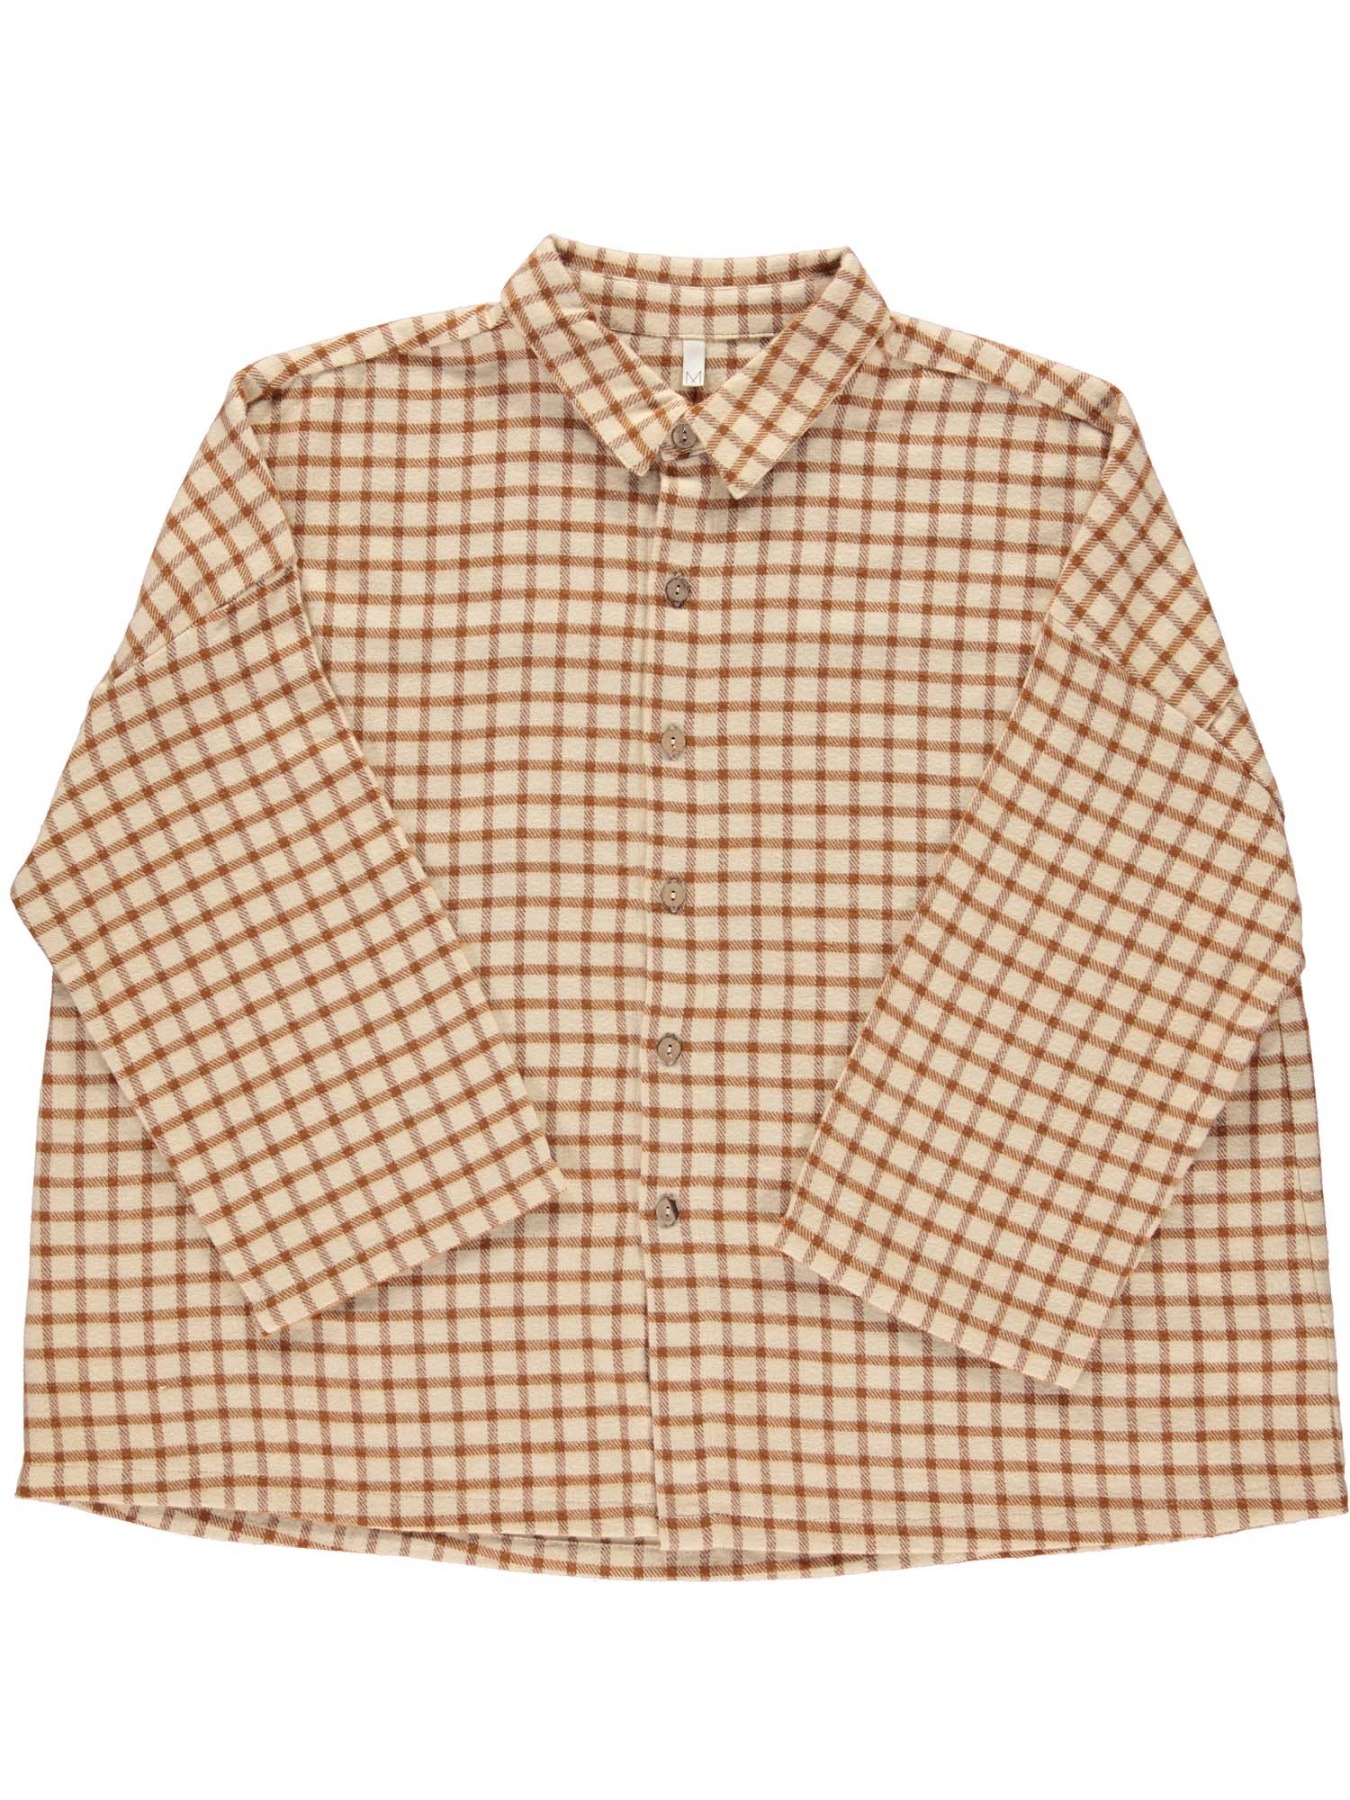 Monkind - Amber Check Shirt - ADULT 7